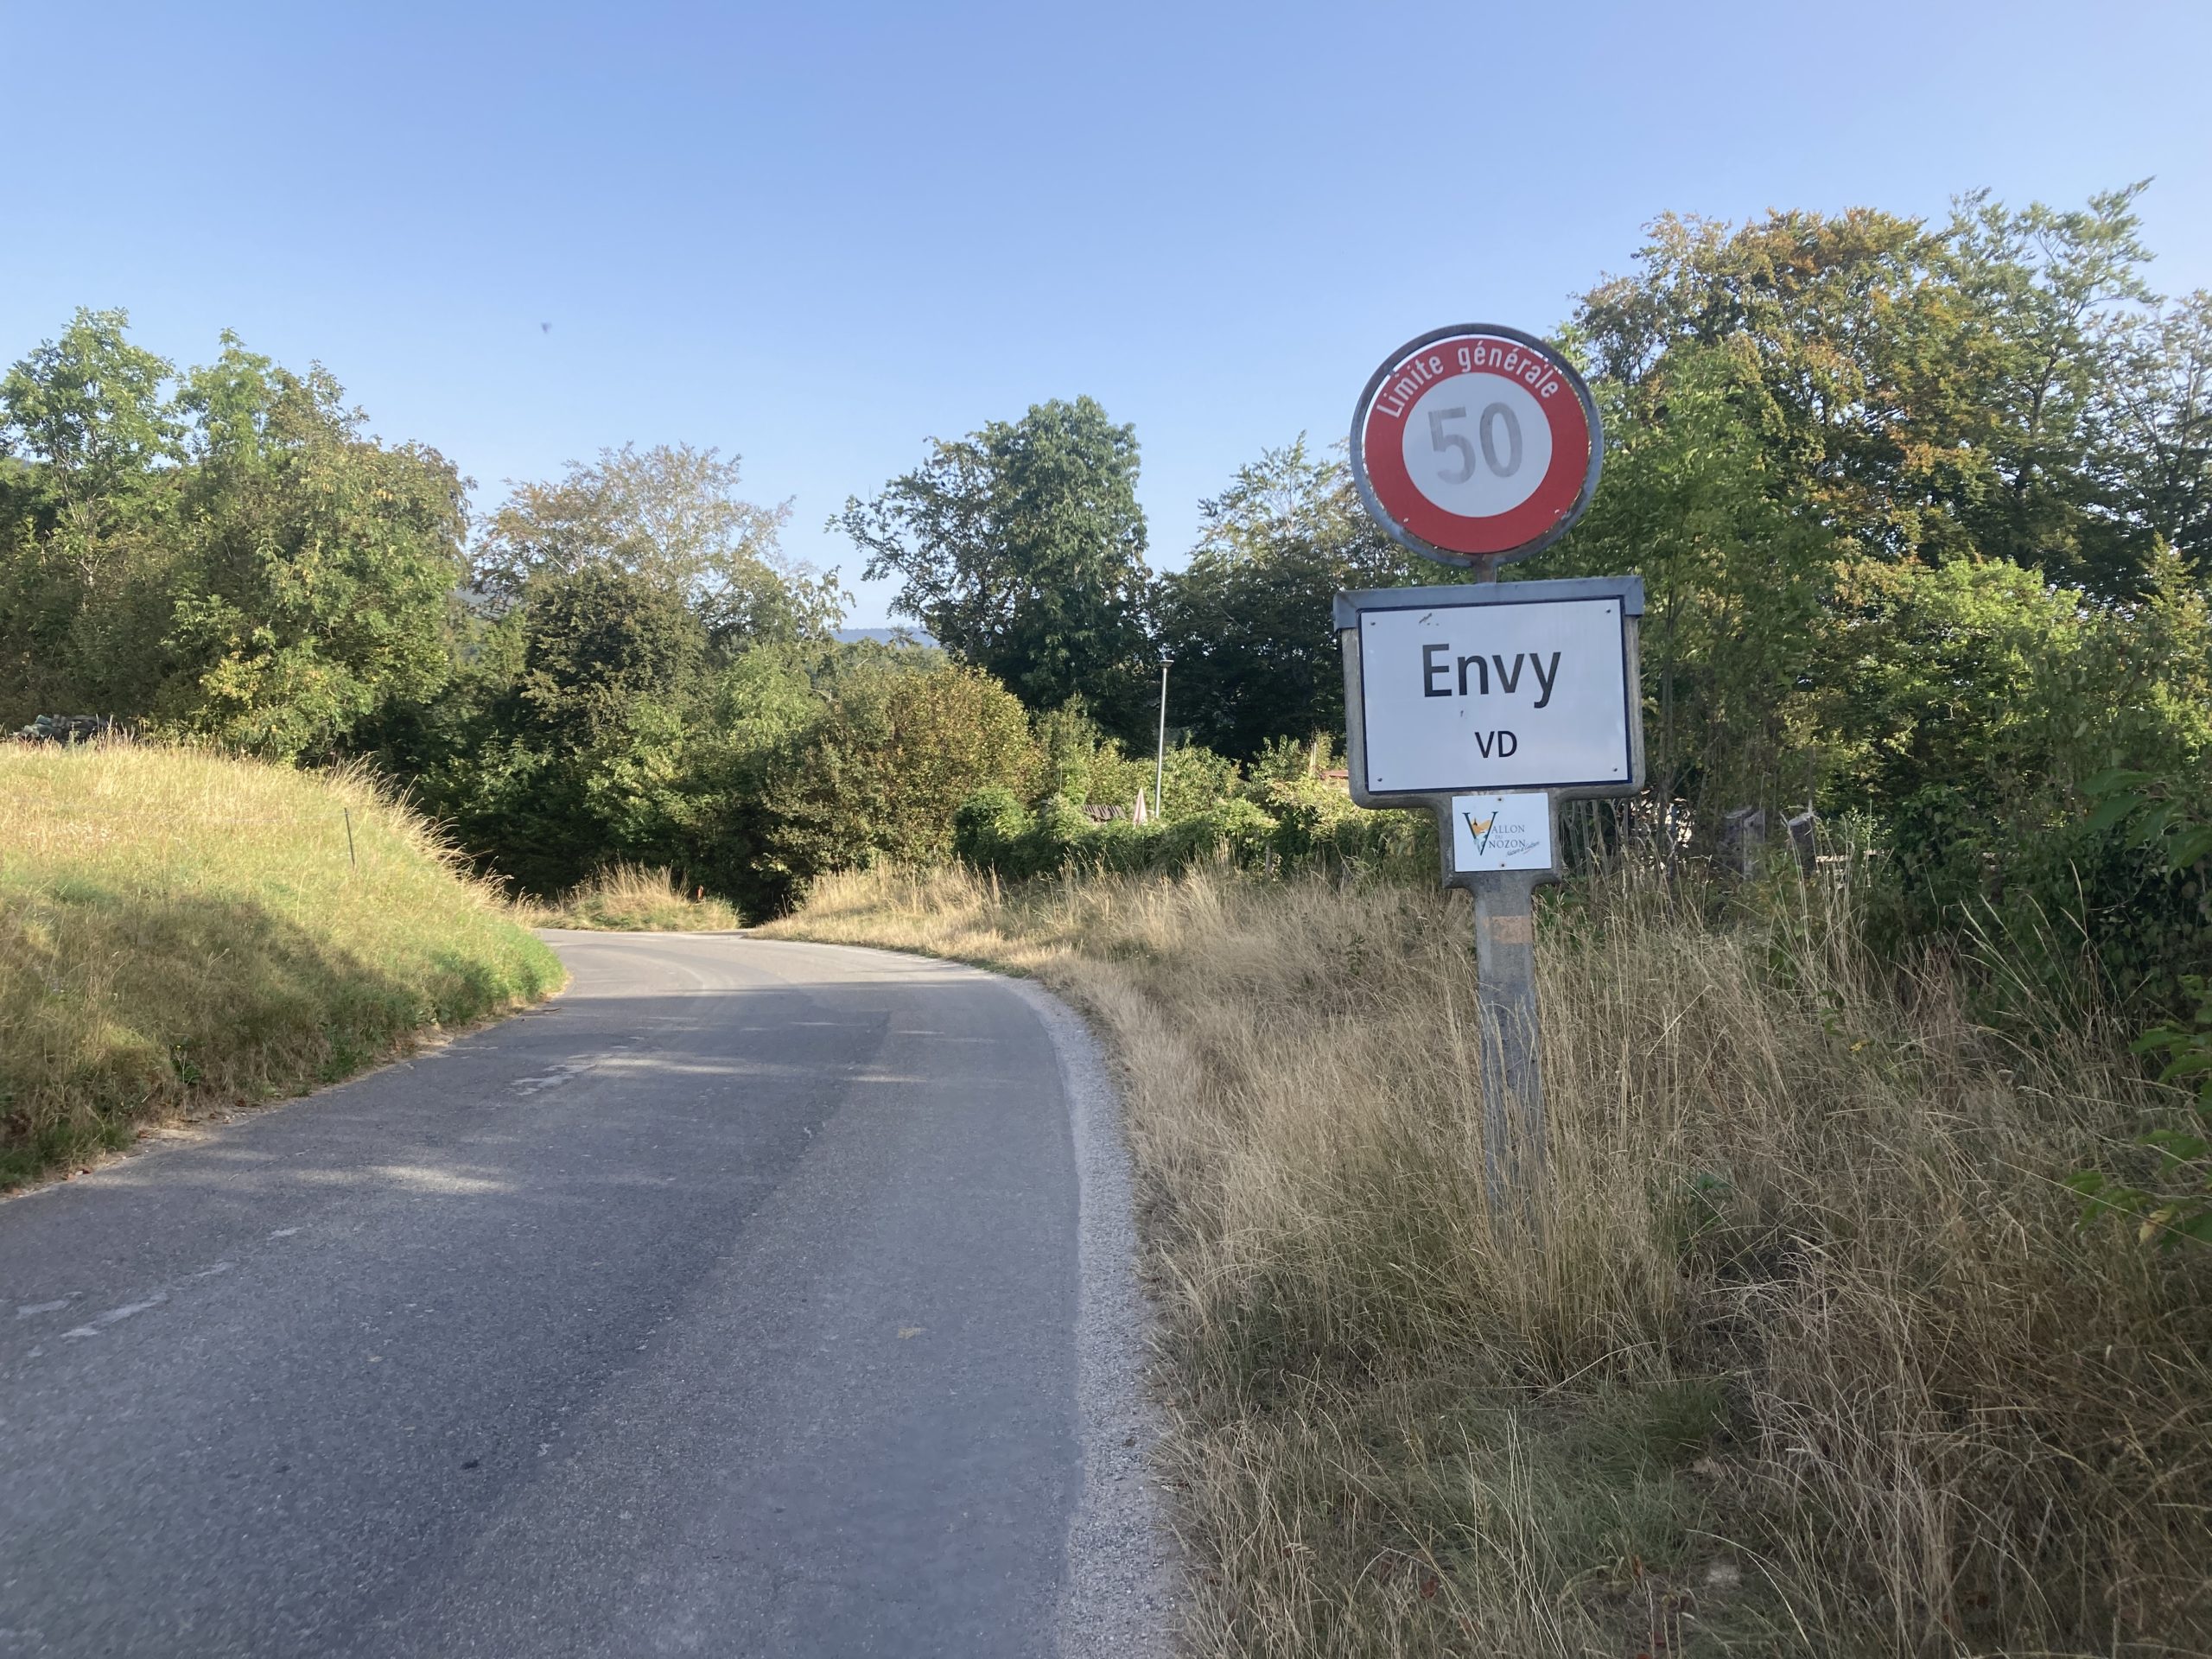 Cycling from L’Isle to RomainMotier